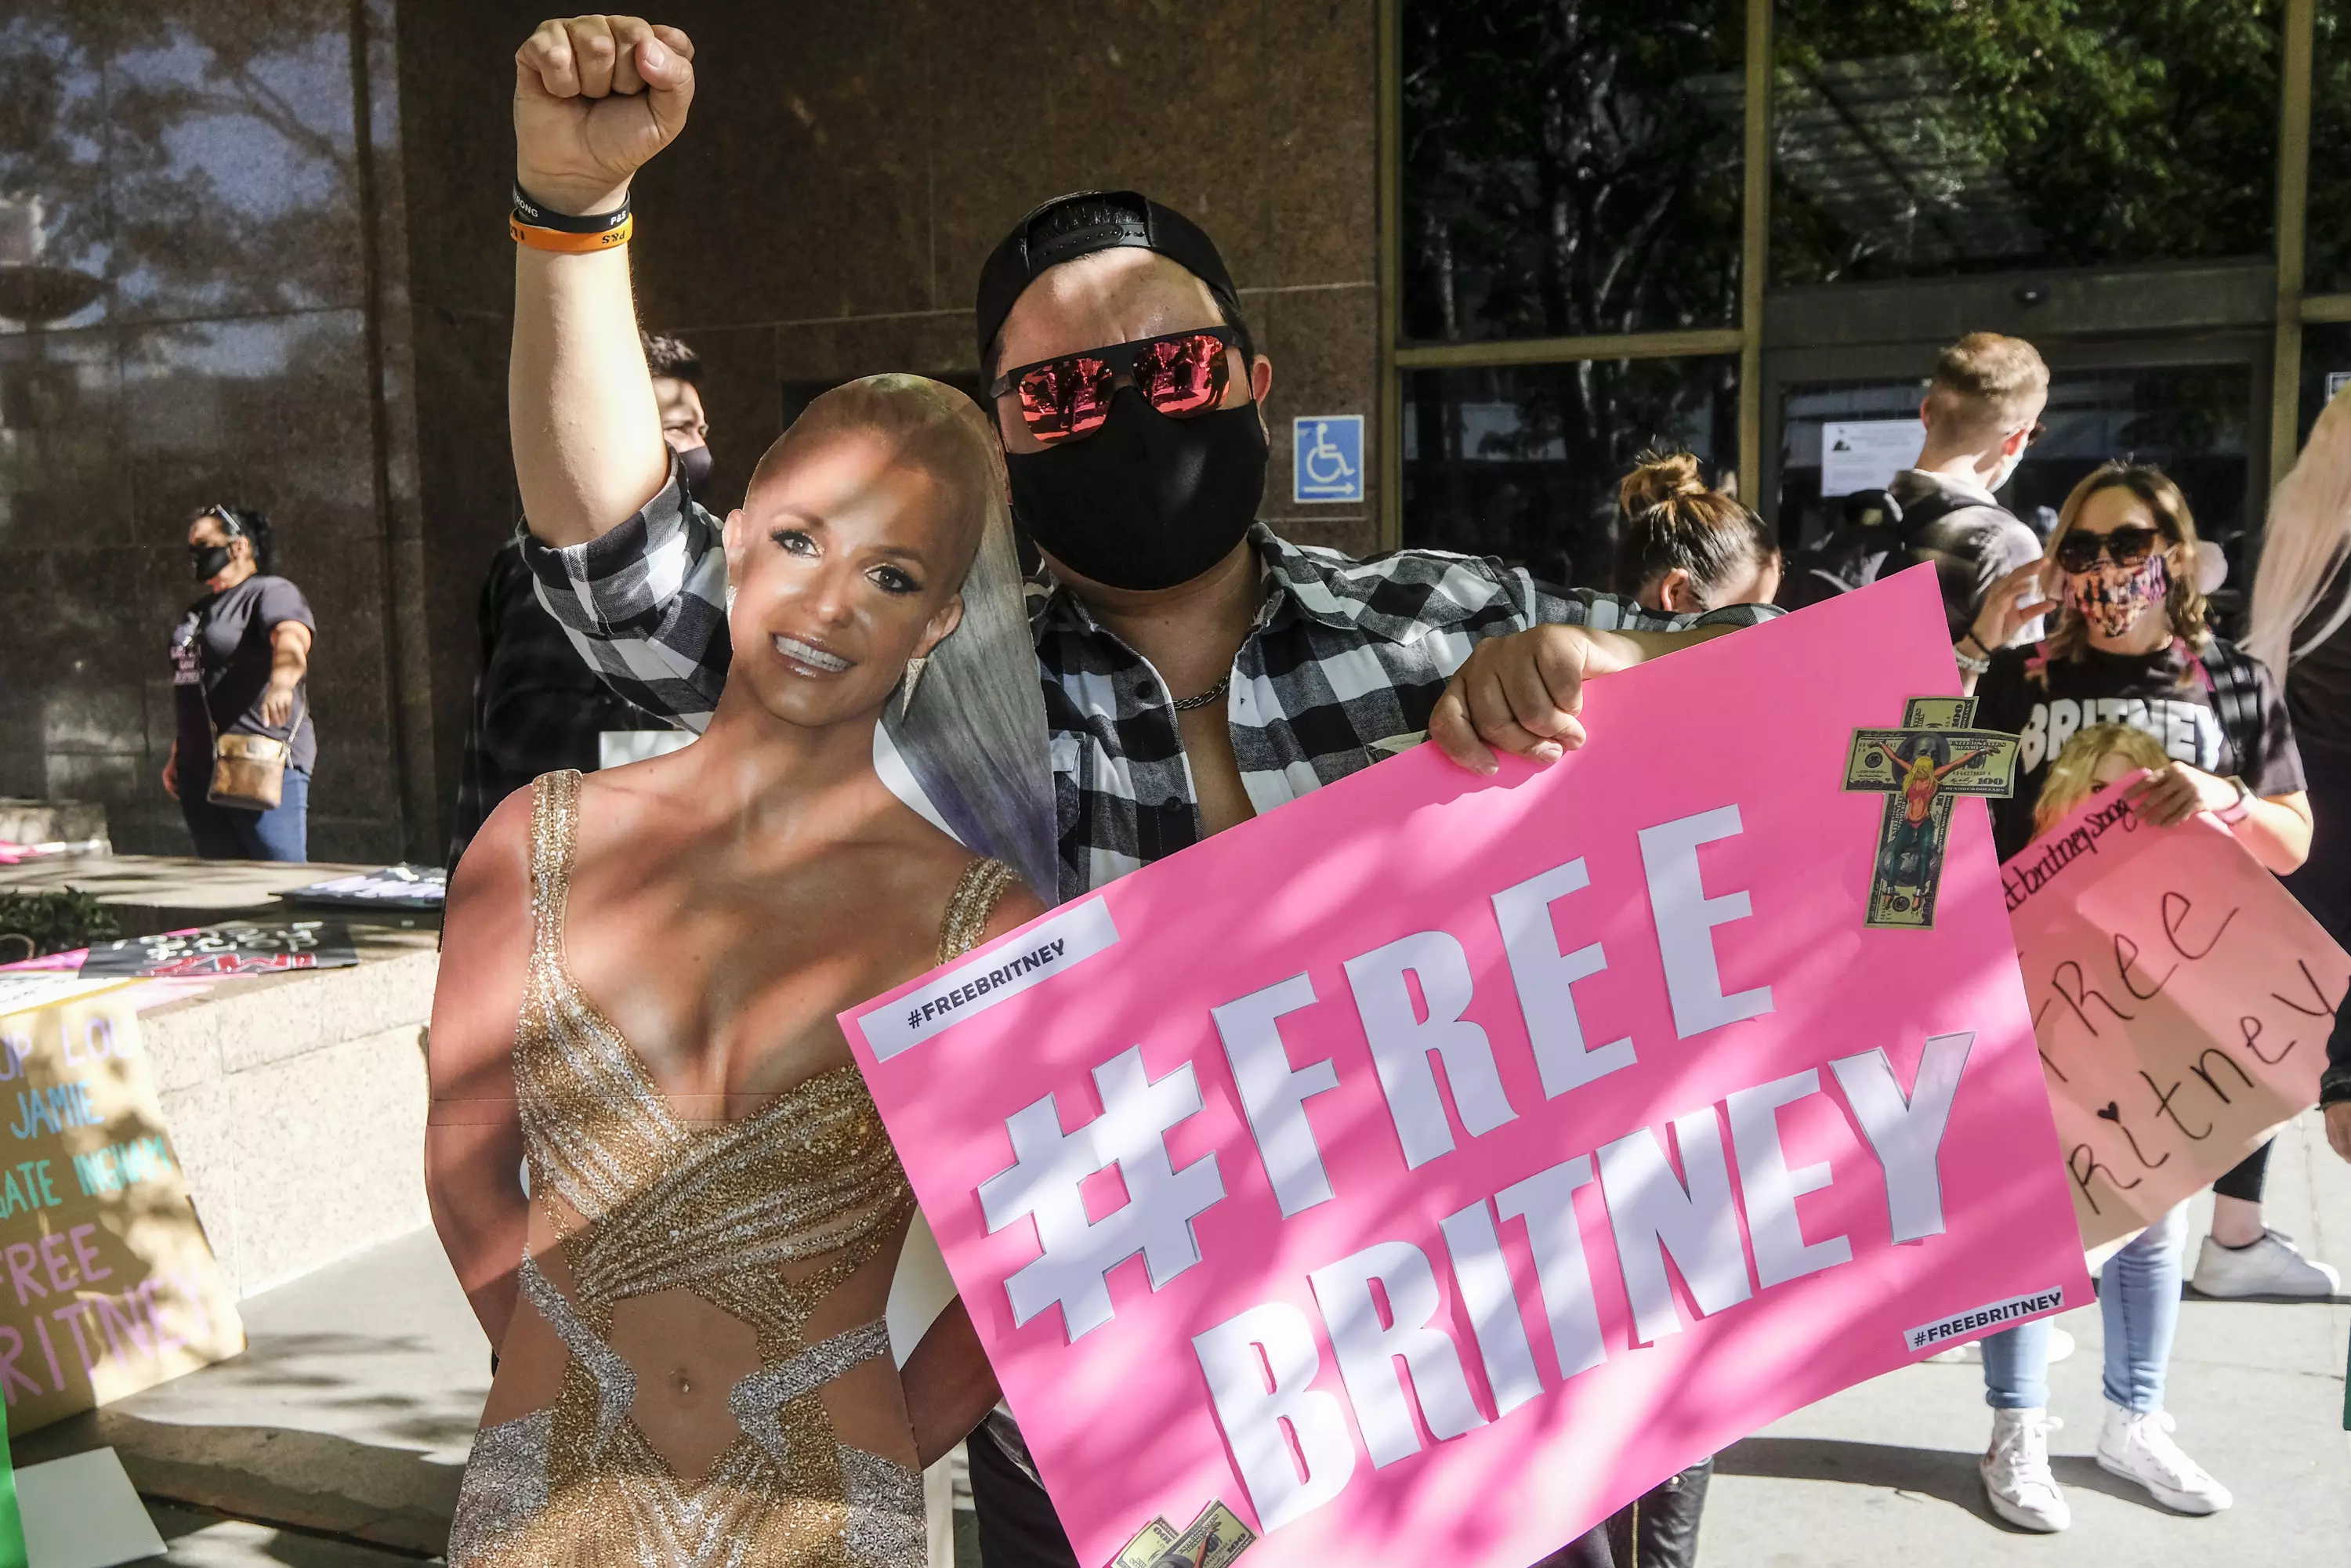 The situation came to the public attention after 'Framing Britney Spears' was released this year.